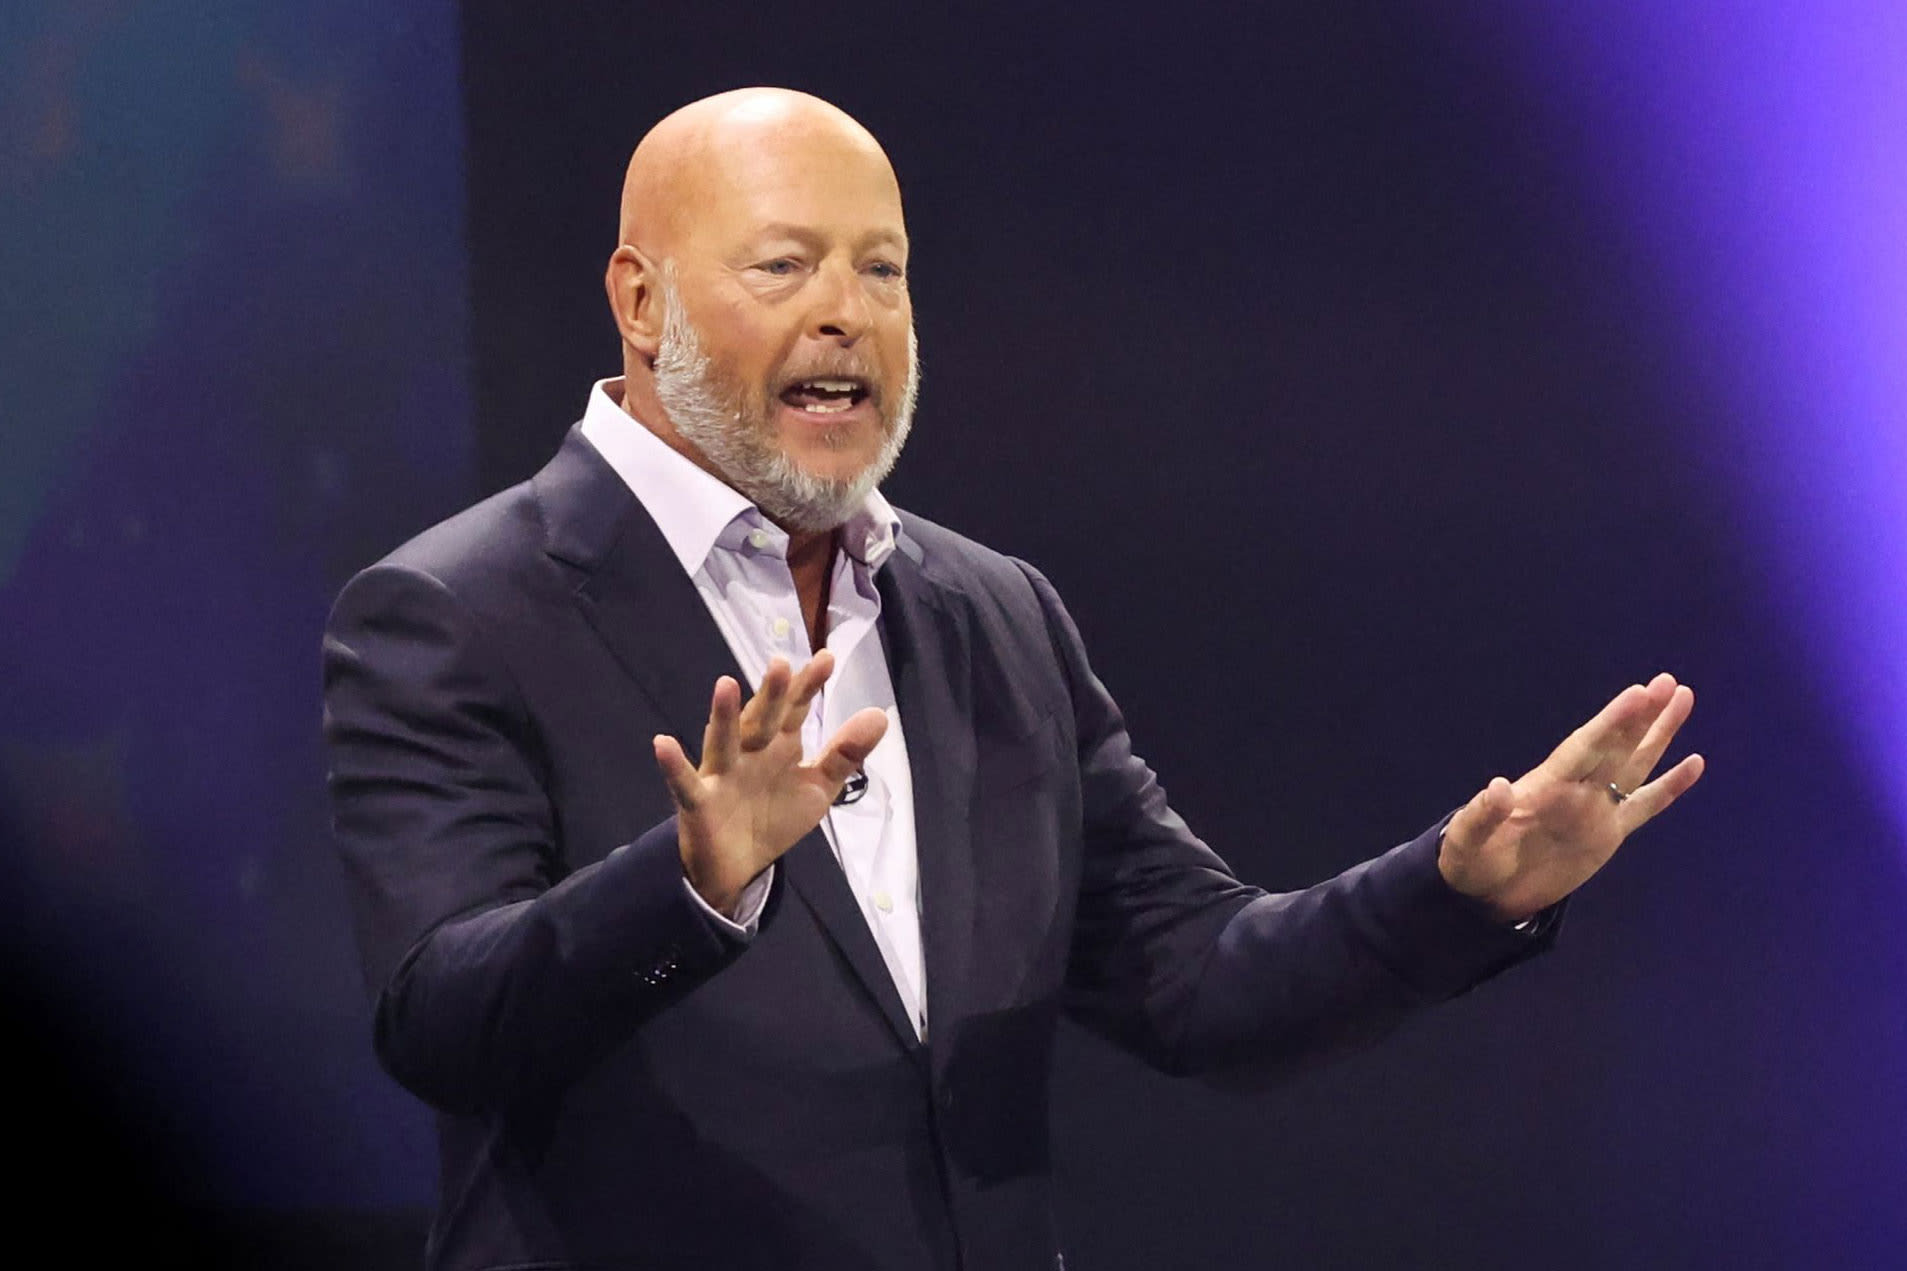 Cramer calls for Disney CEO’s firing, says company’s ‘balance sheet from hell’ must be fixed